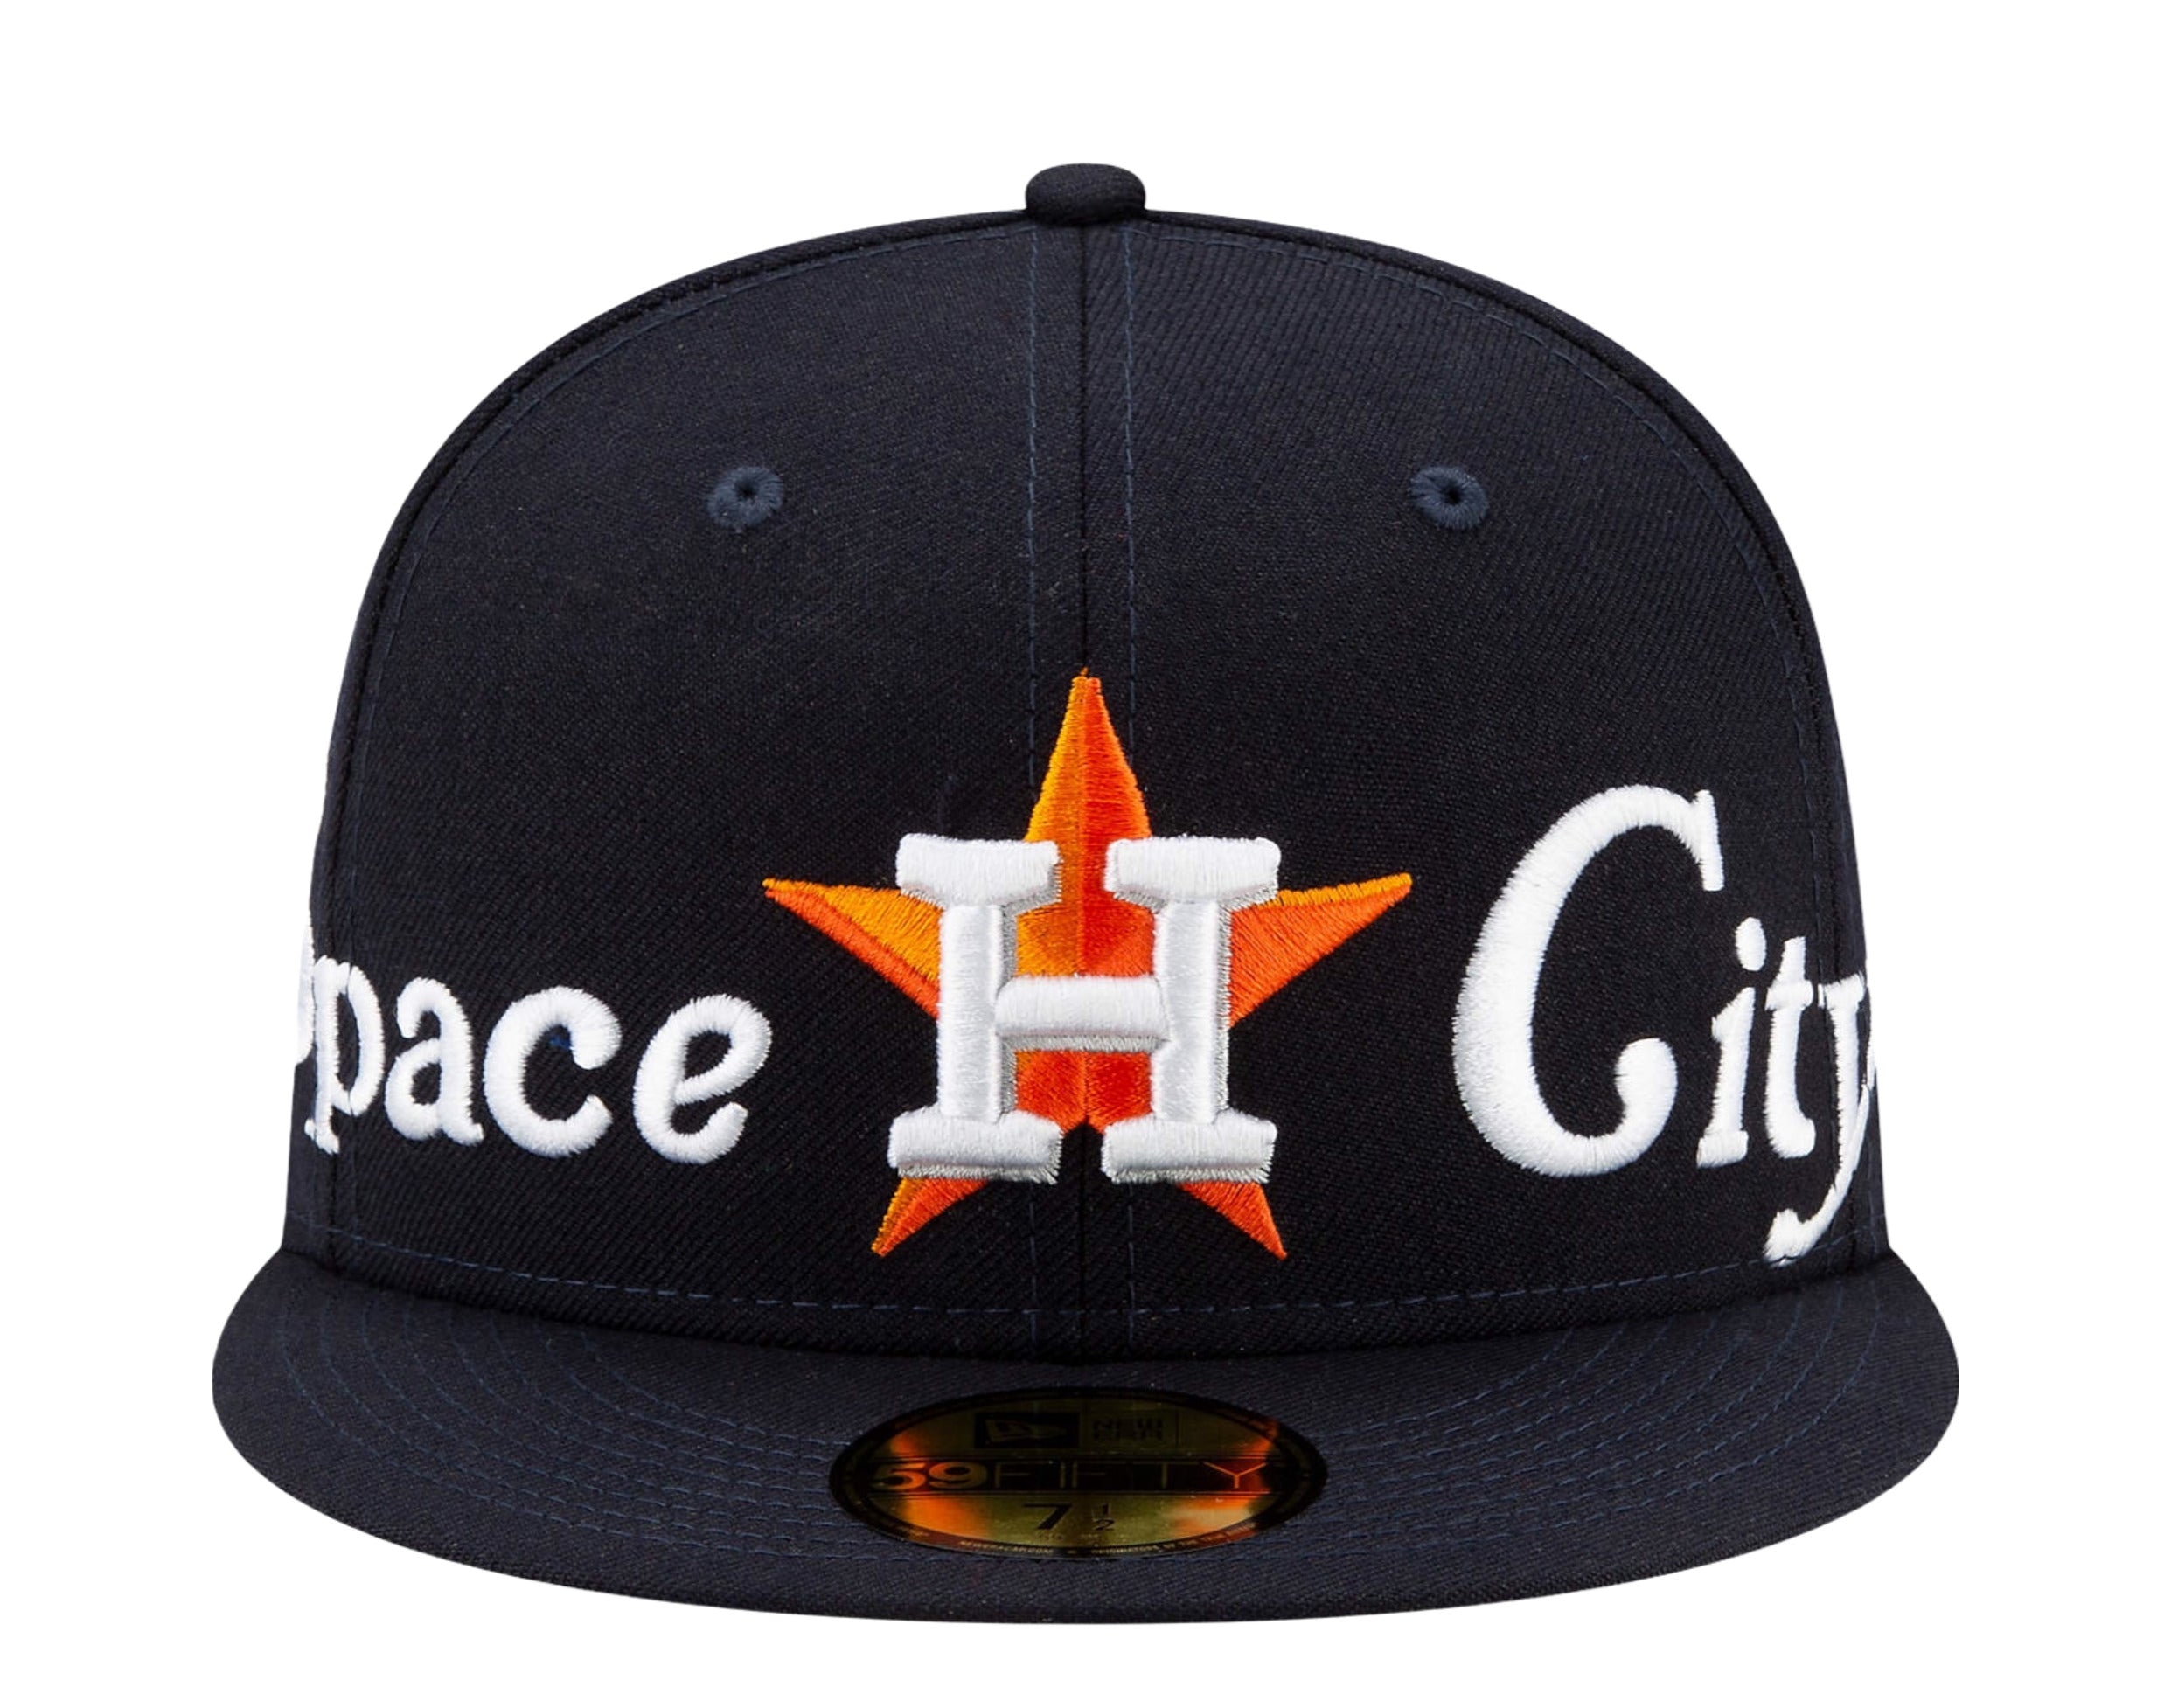 New Era Houston Astros 'Space City' Theme Fitted Hat